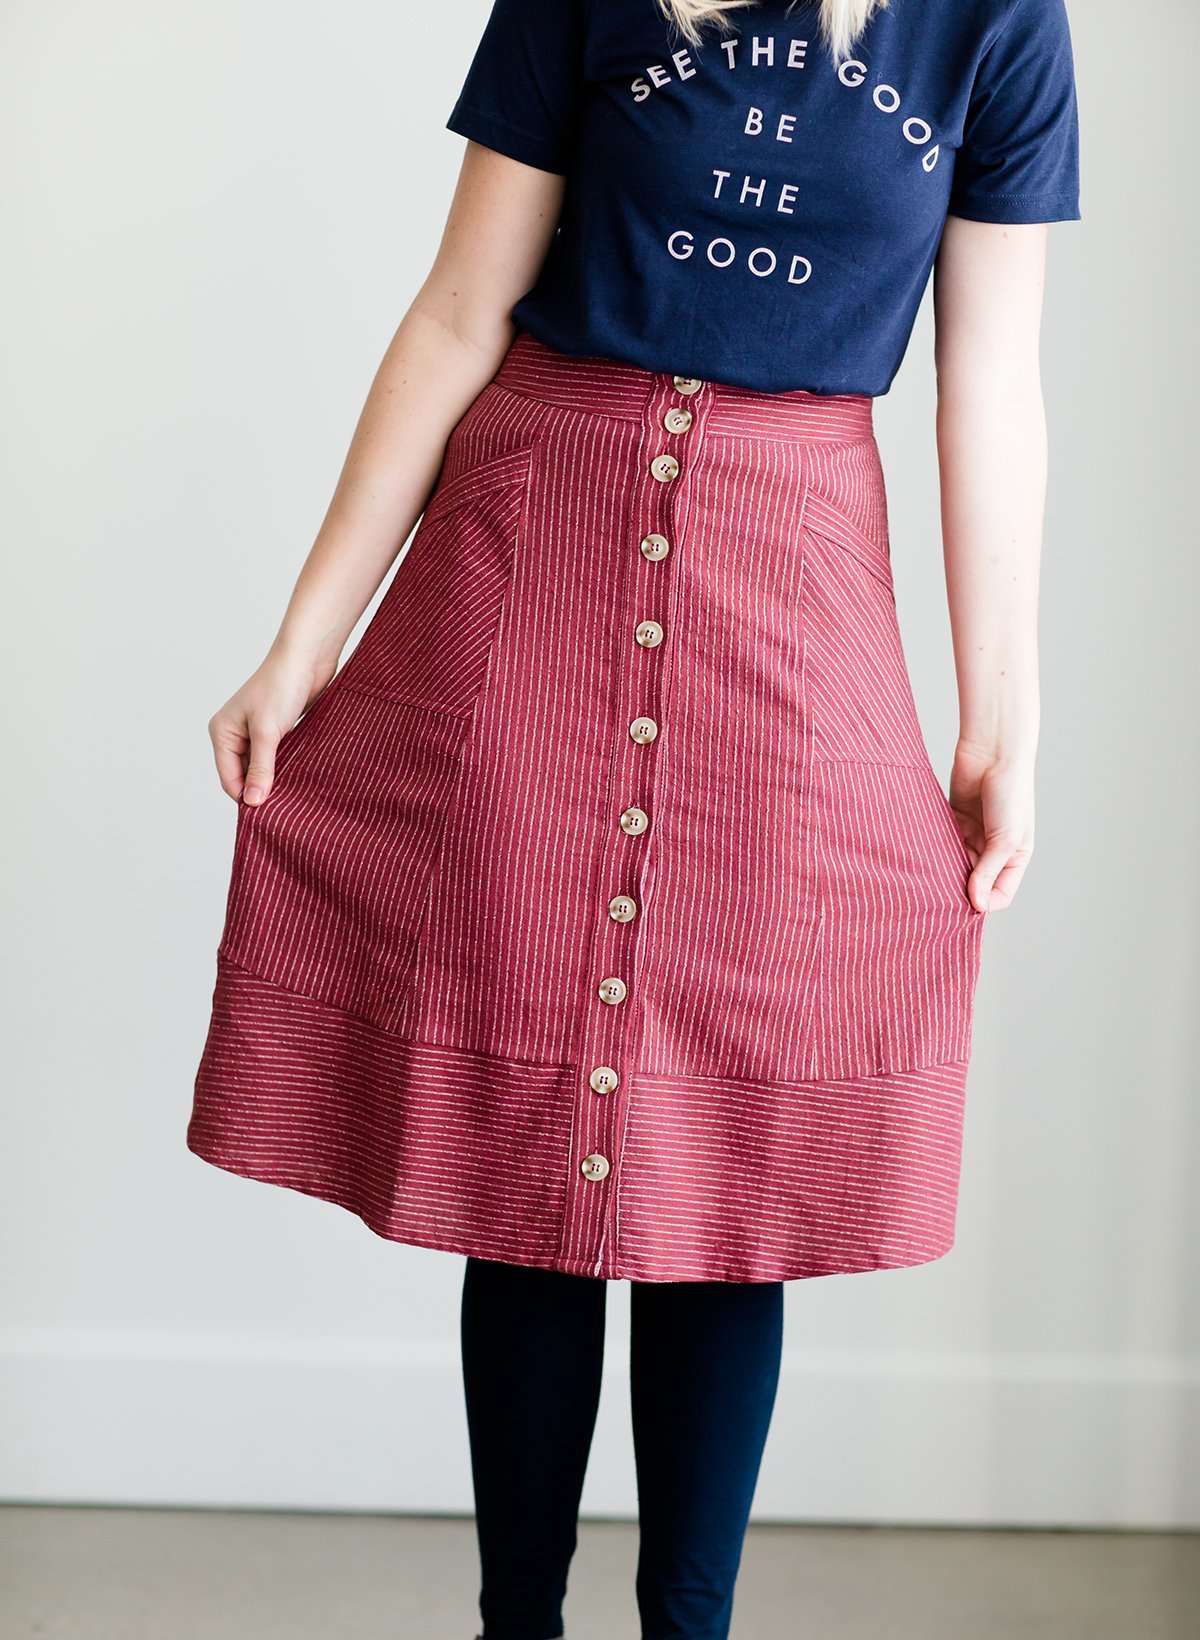 Woman wearing a modest below the knee striped skirt. This burgandy skirt has a button front, pockets, and A-line cut.